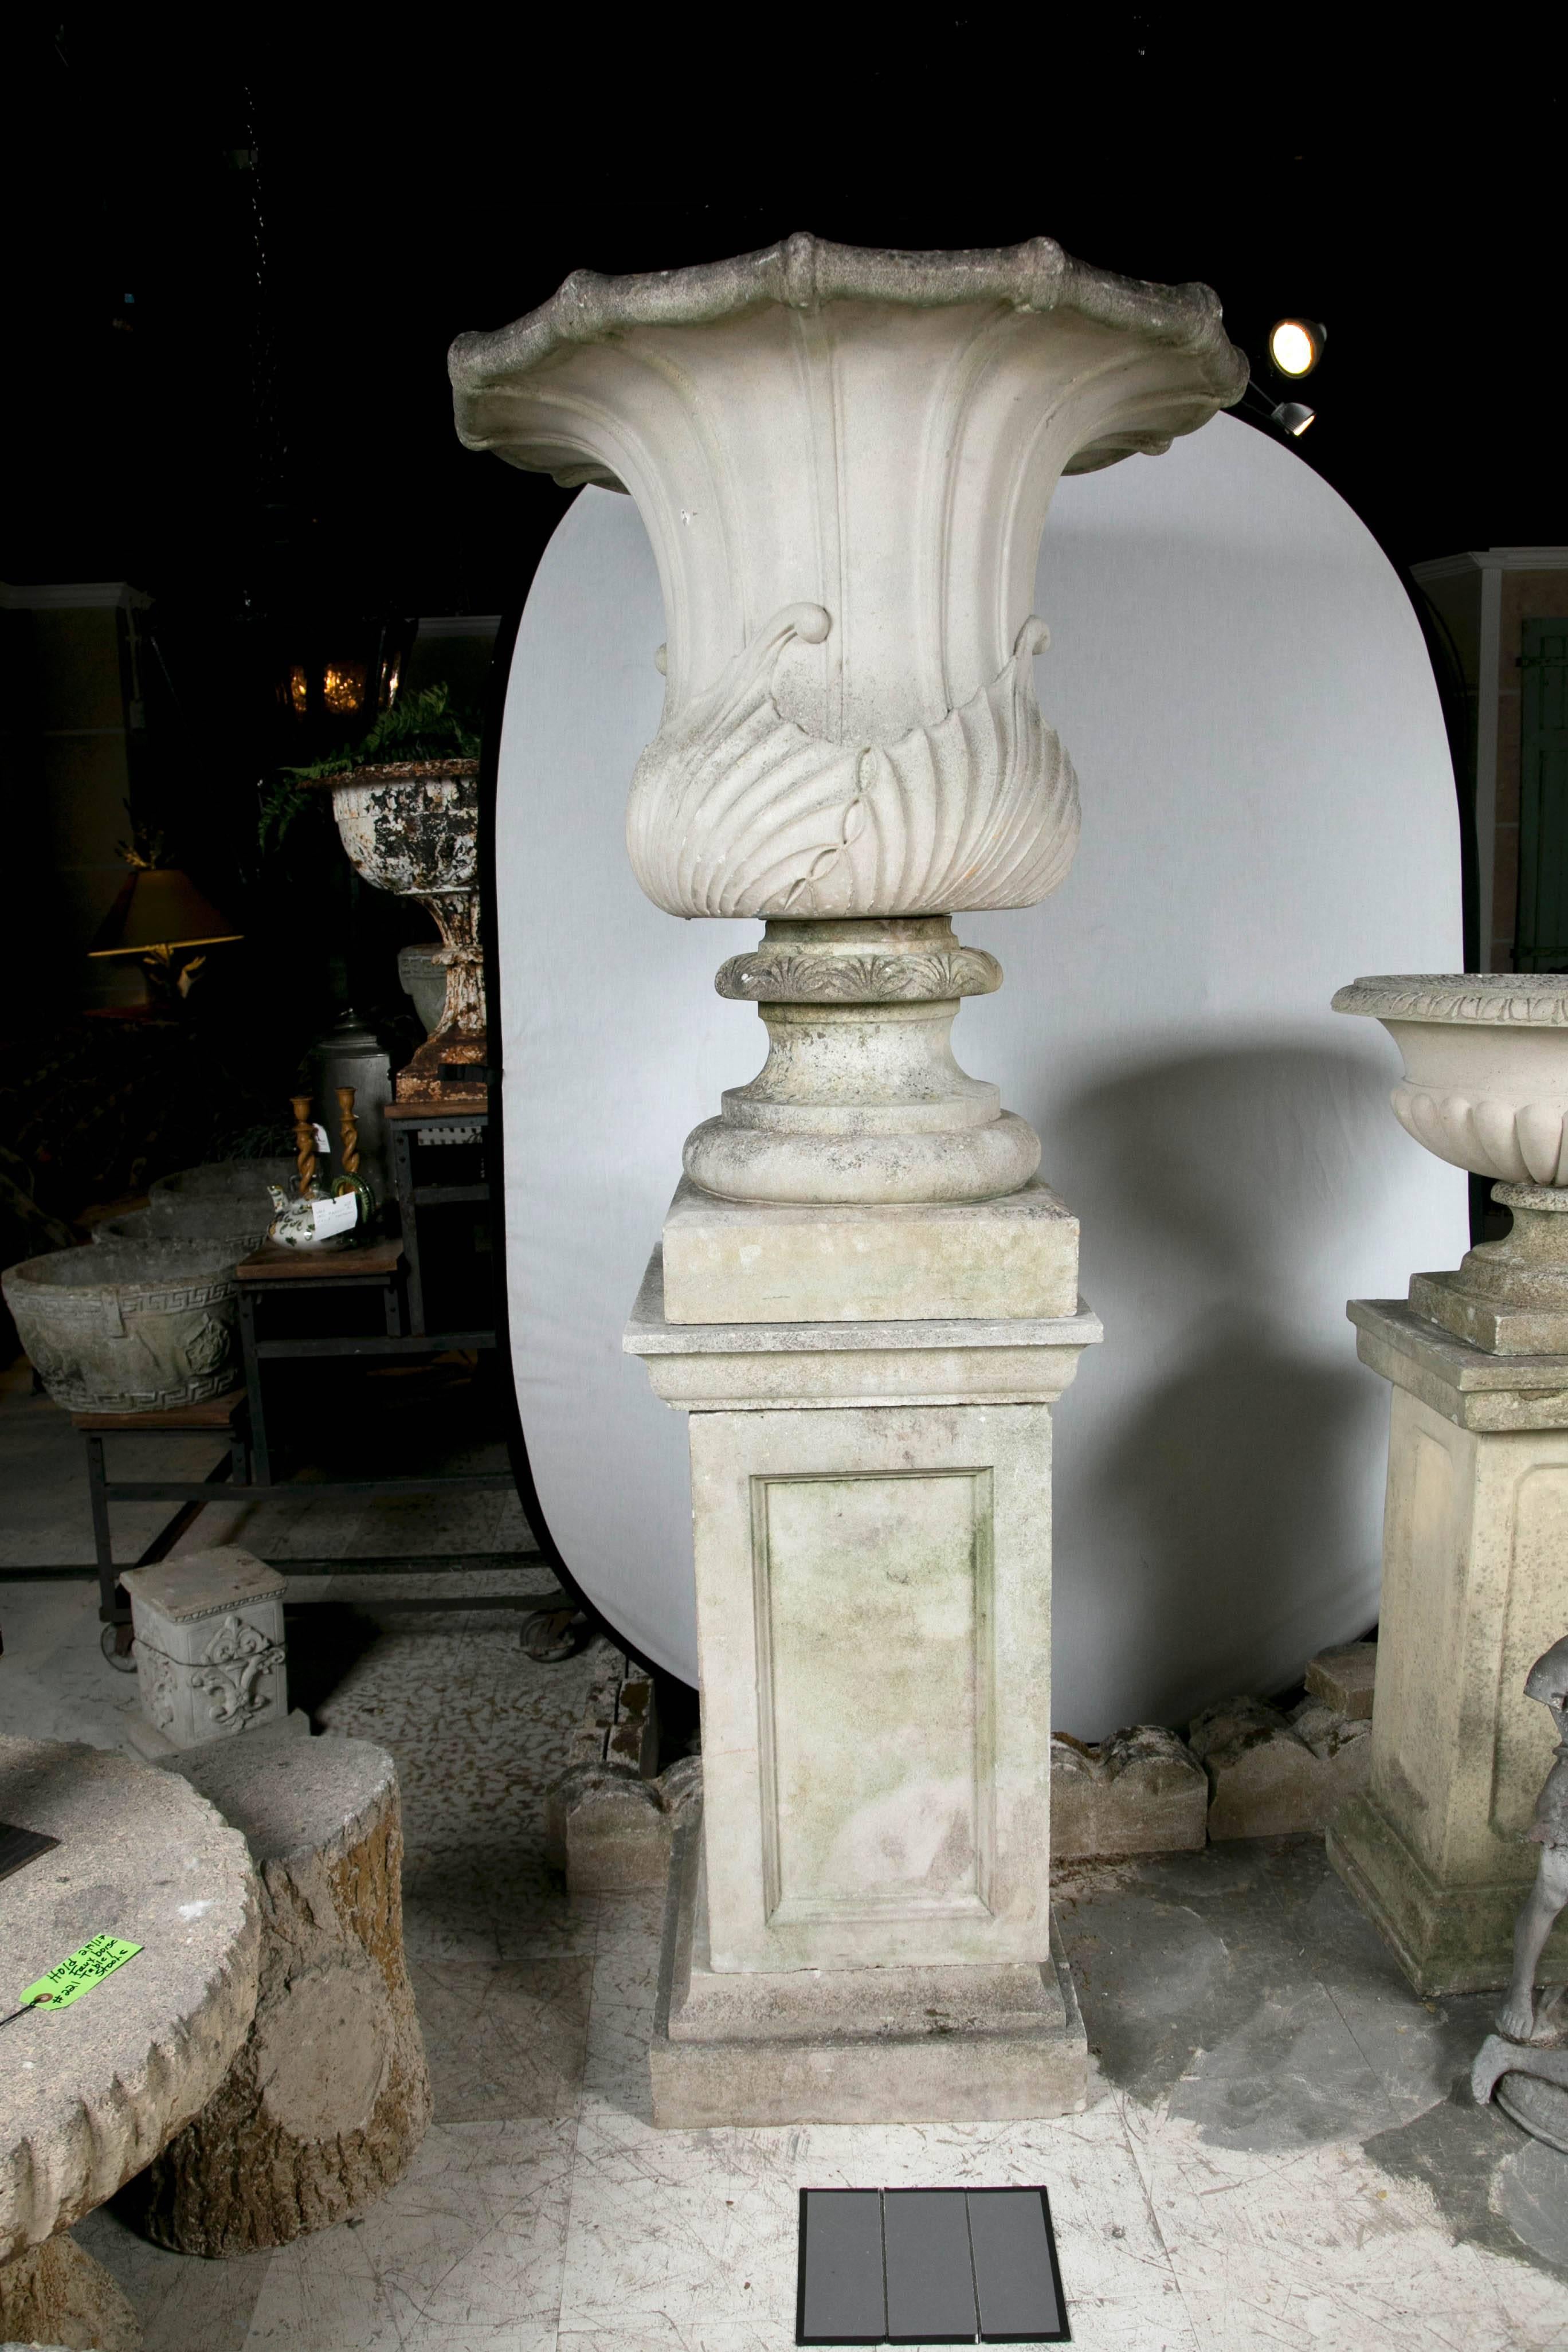 Outstanding English garden urn on classical base. (Urn and base equal 2 pcs.)